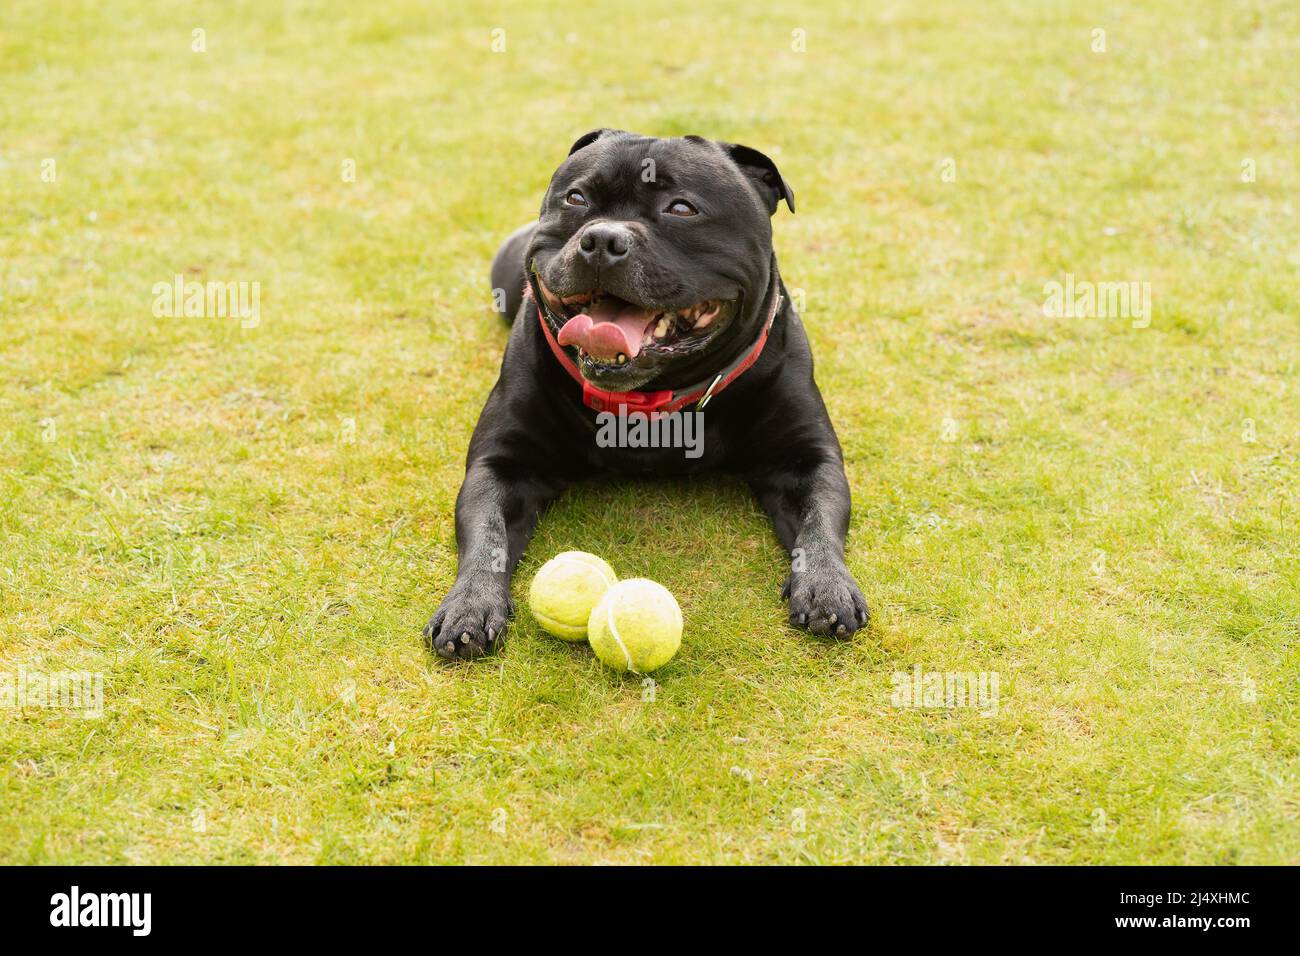 Staffordshire Bull Terrier dog lying down on grass, he looks happy and is  smiling. There are two tennis balls in front of him Stock Photo